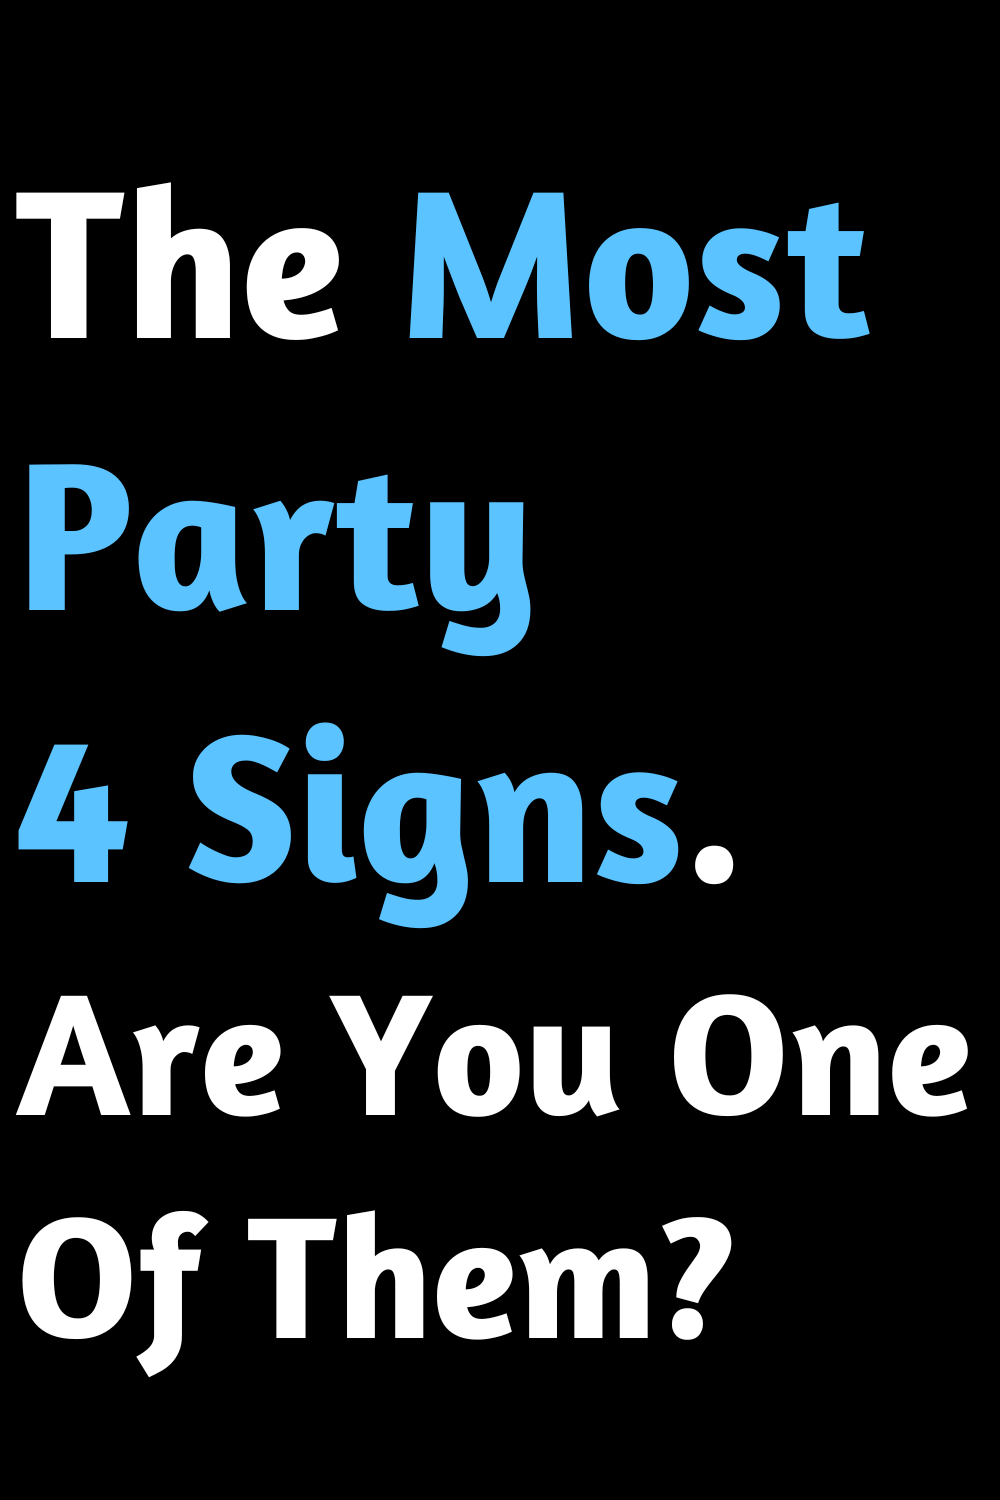 The Most Party 4 Signs. Are You One Of Them?